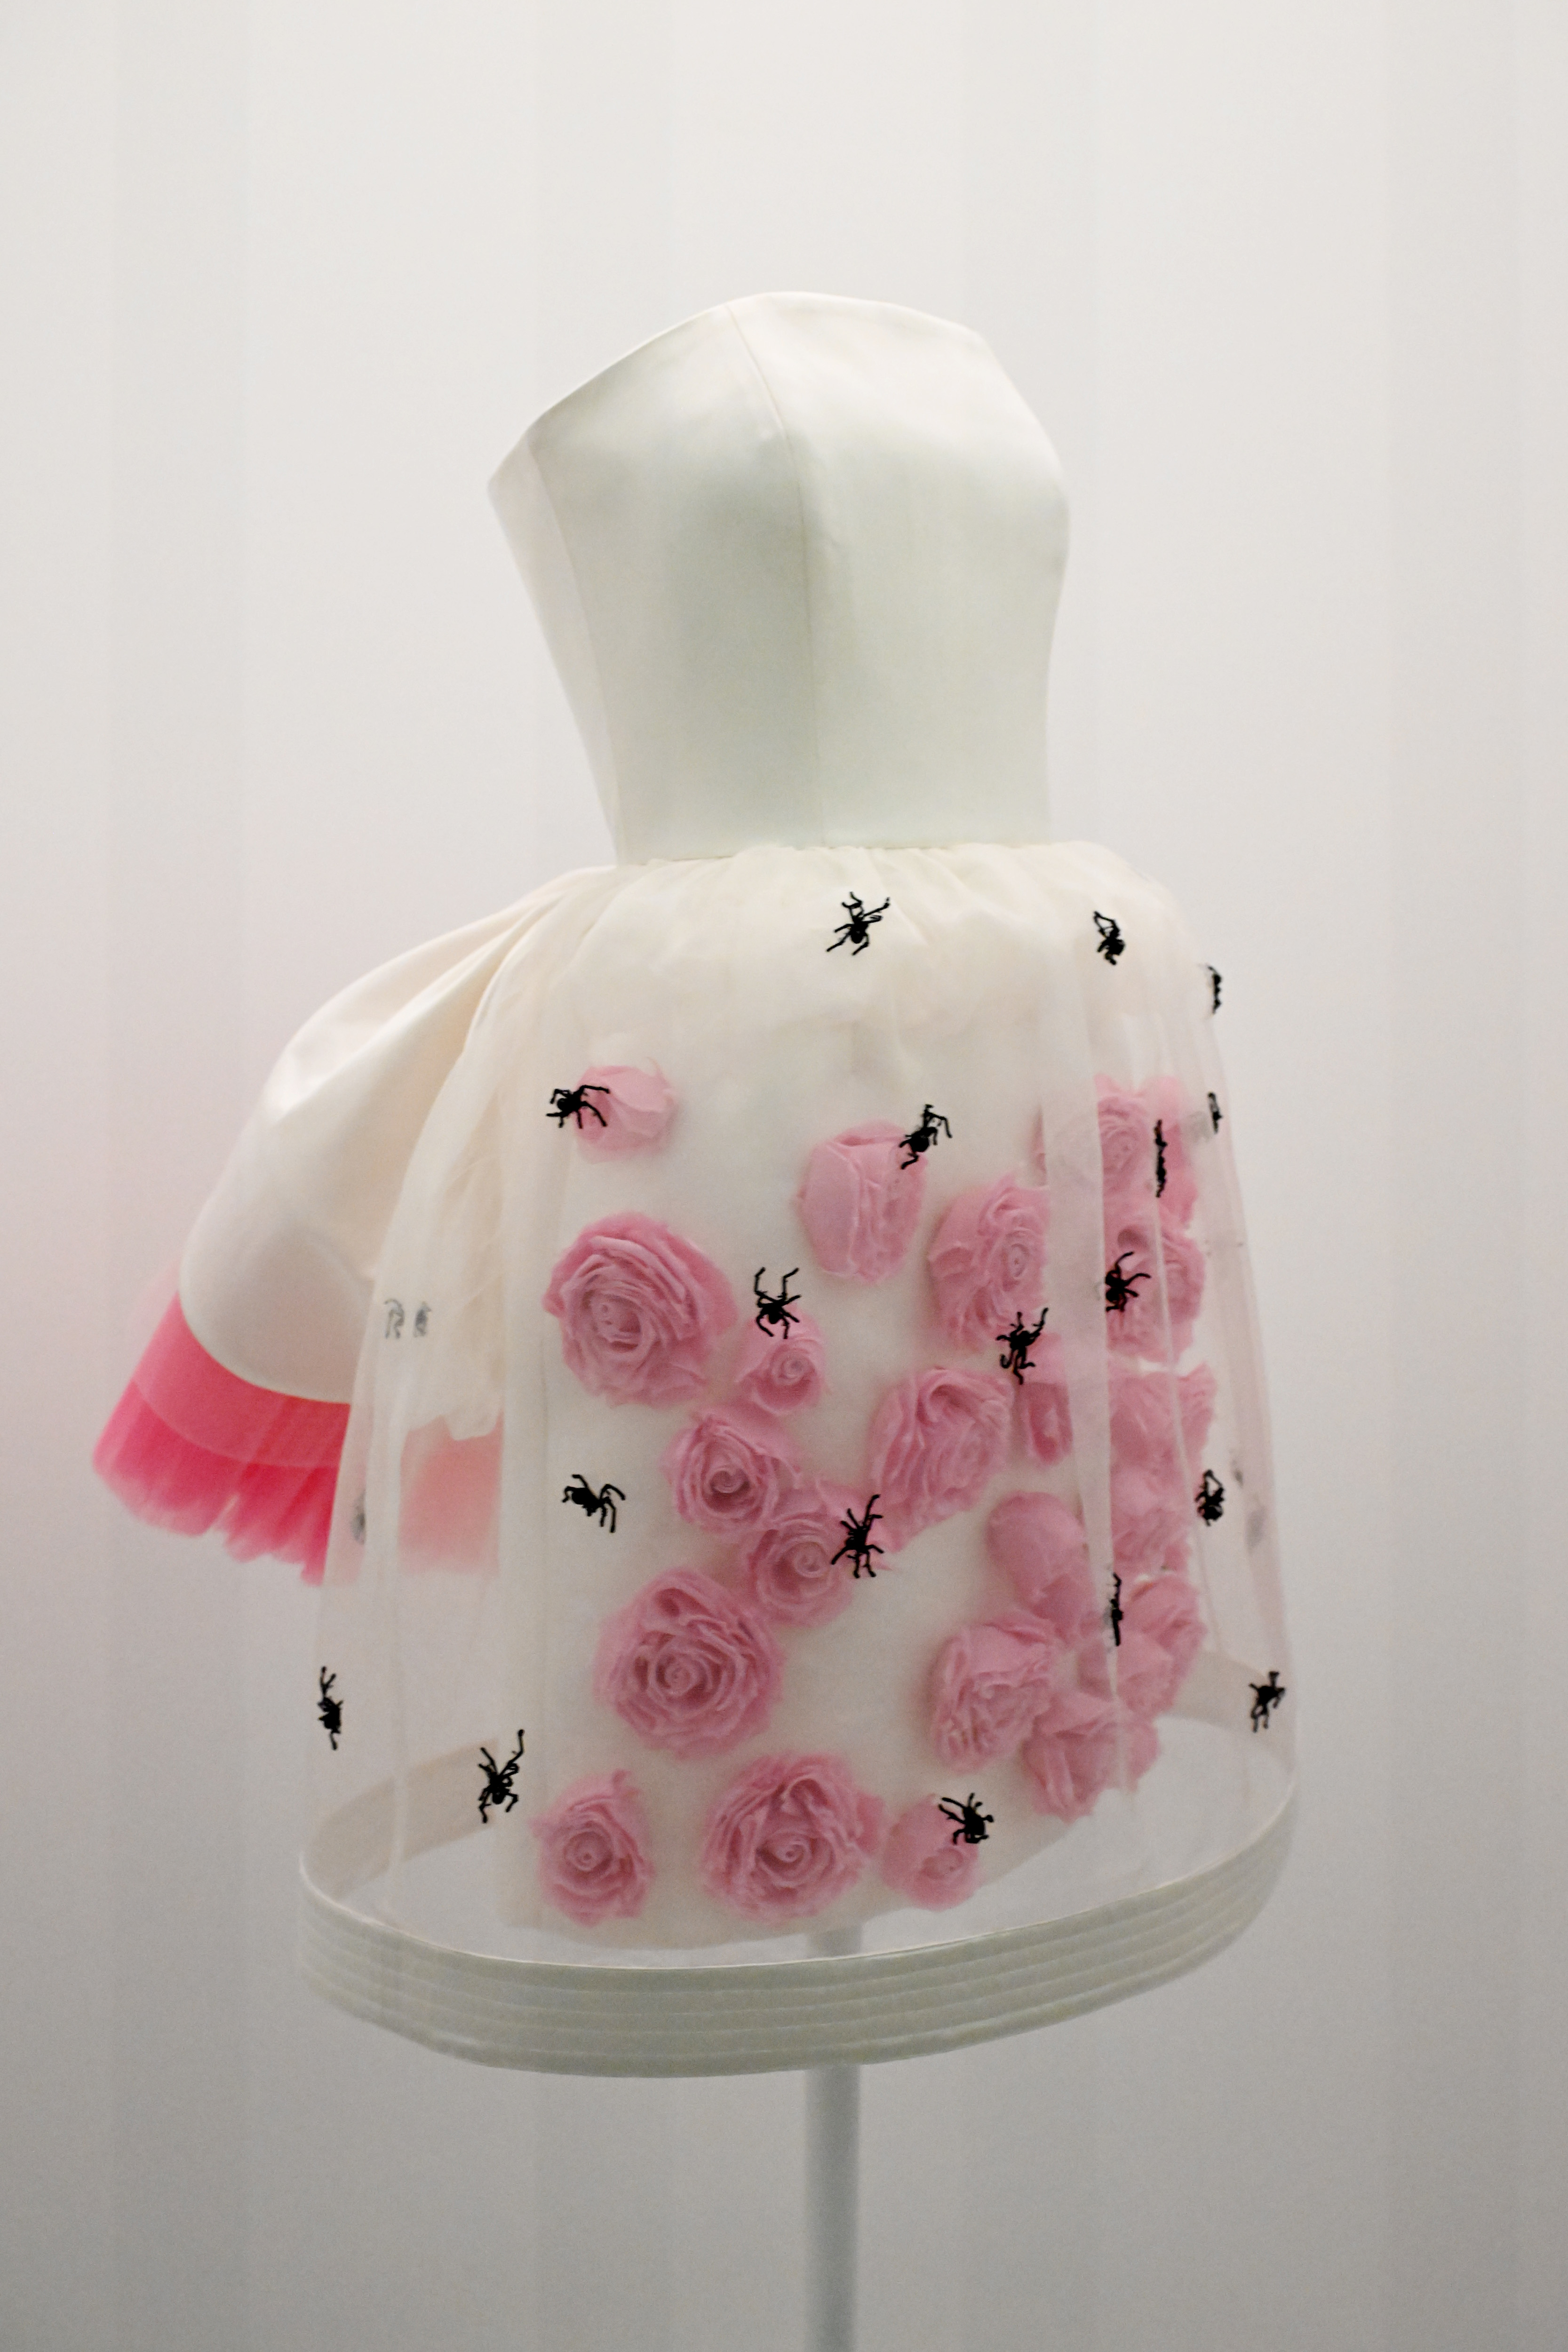 Mannequin displaying a dress with three-dimensional roses and spider embellishments